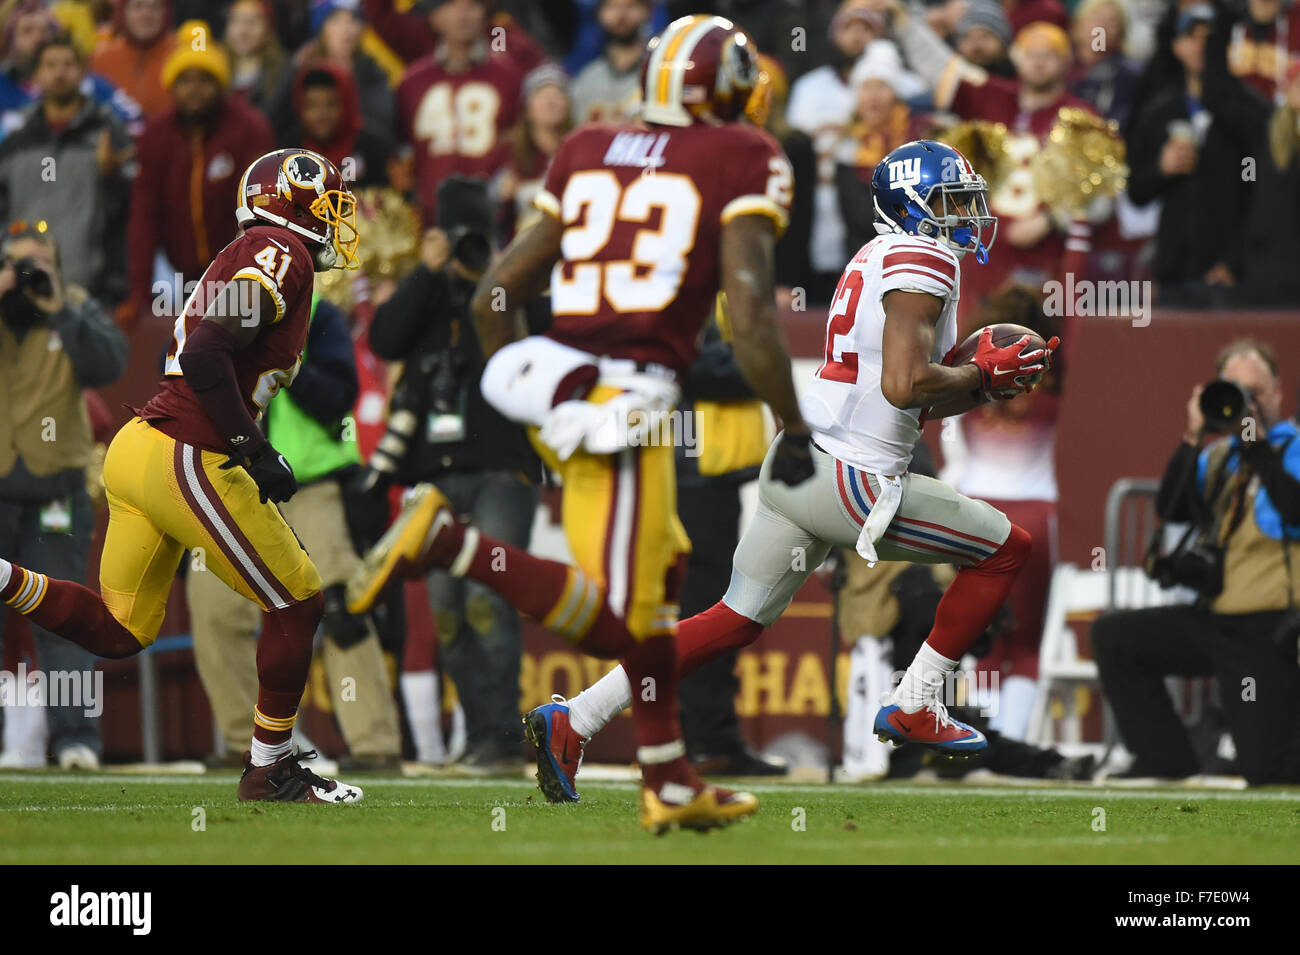 Landover, Maryland, USA. 29th November, 2015. New York Giants wide receiver Rueben Randle (82) rushes for a touch down after a reception during the matchup between the New York Giants and the Washington Redskins at FedEx Field in Landover, MD. The Redskins held a first half, shutout lead to win 14-20. Credit:  Cal Sport Media/Alamy Live News Stock Photo